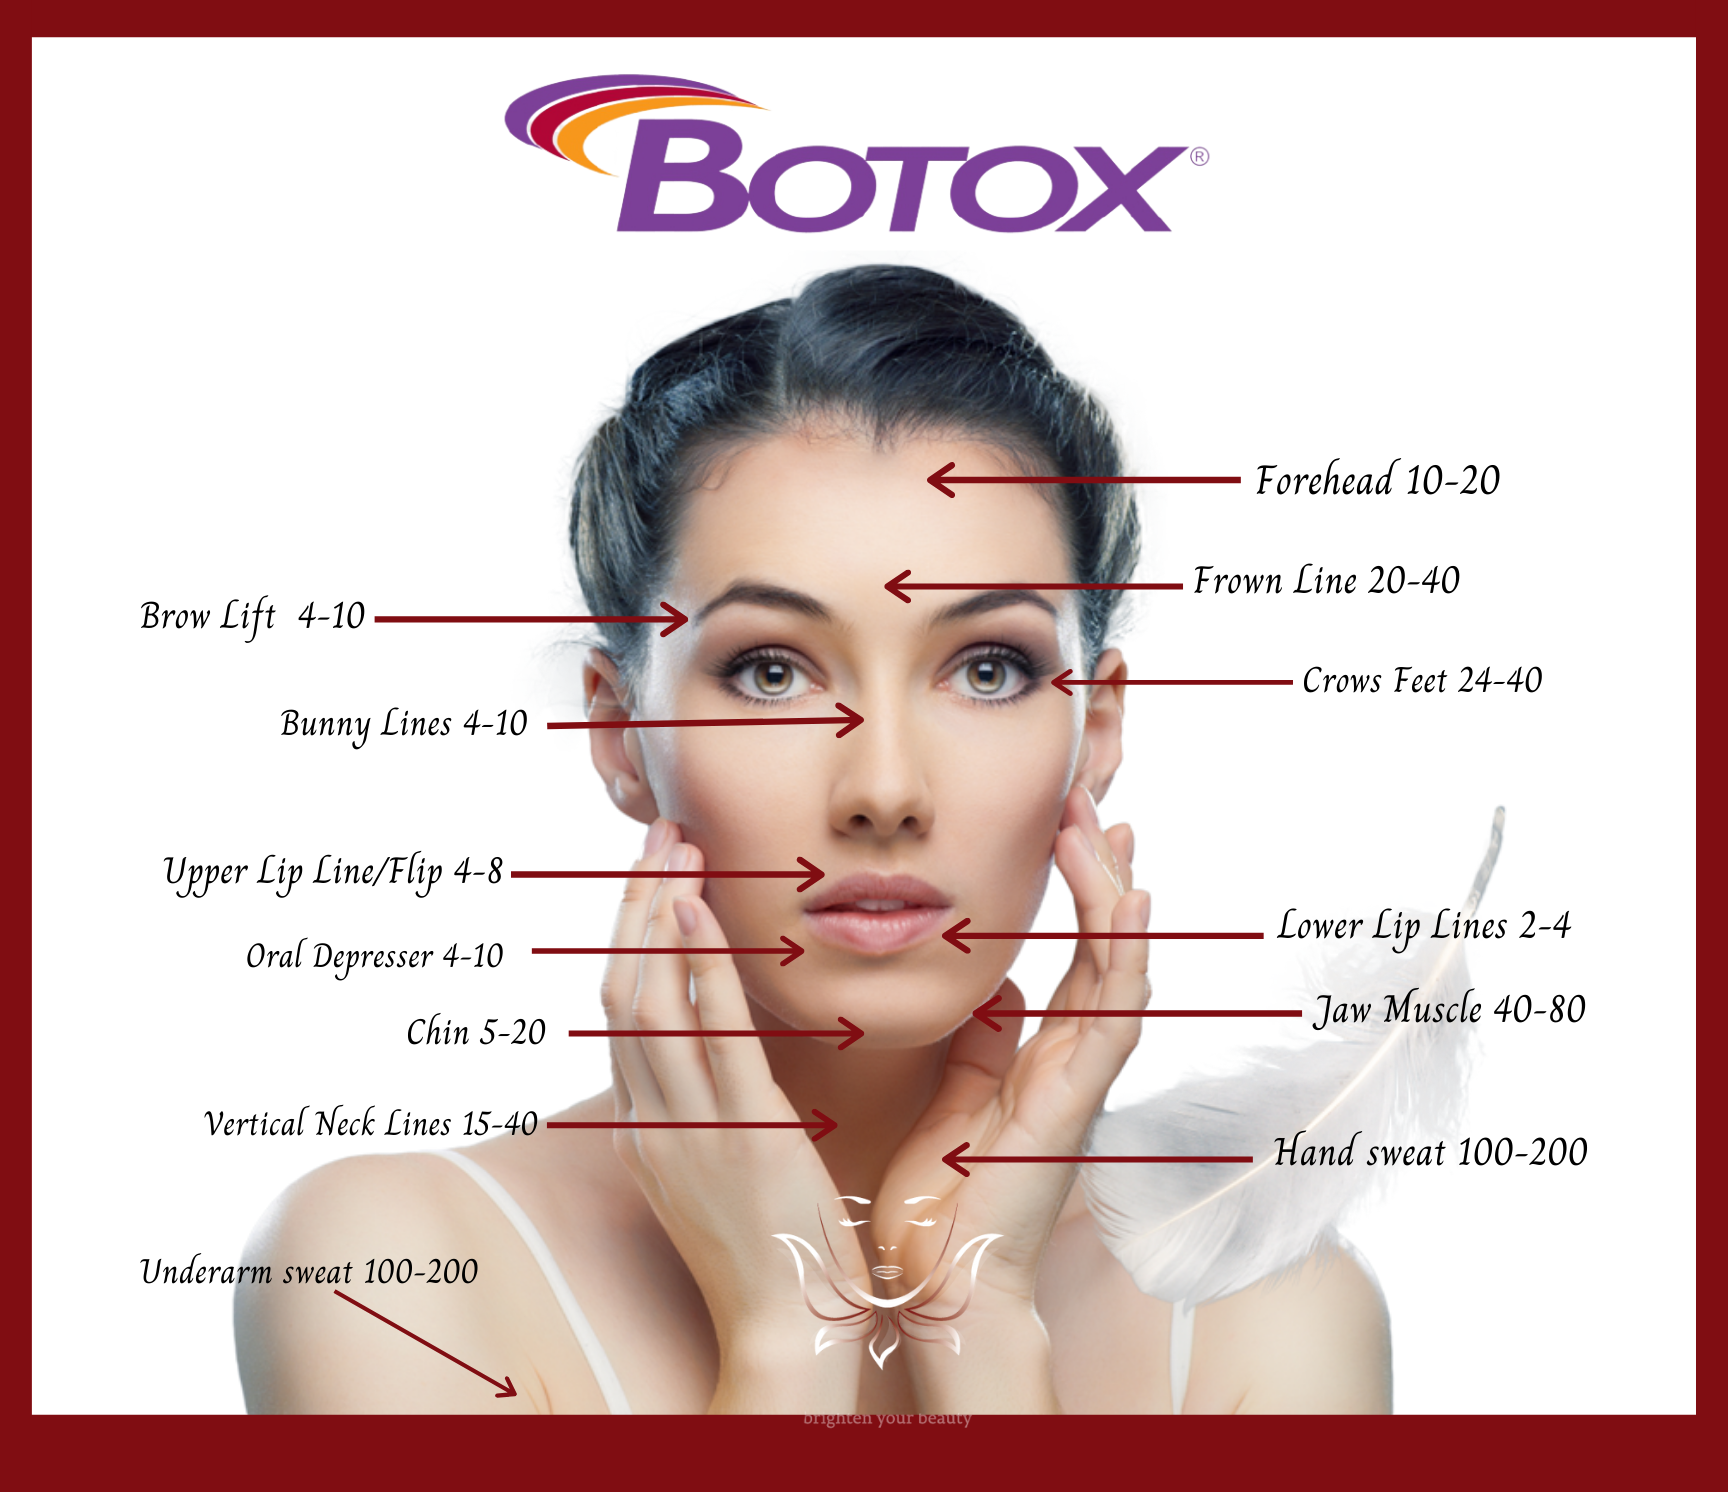 Chart Showing Prominent Injection Sites for Botox and Dysport, such as the Forehead, Frown Lines, Eyebrows, Crows Feet, Bunny Lines, Upper and Lower Lips, Chin, and Neck.